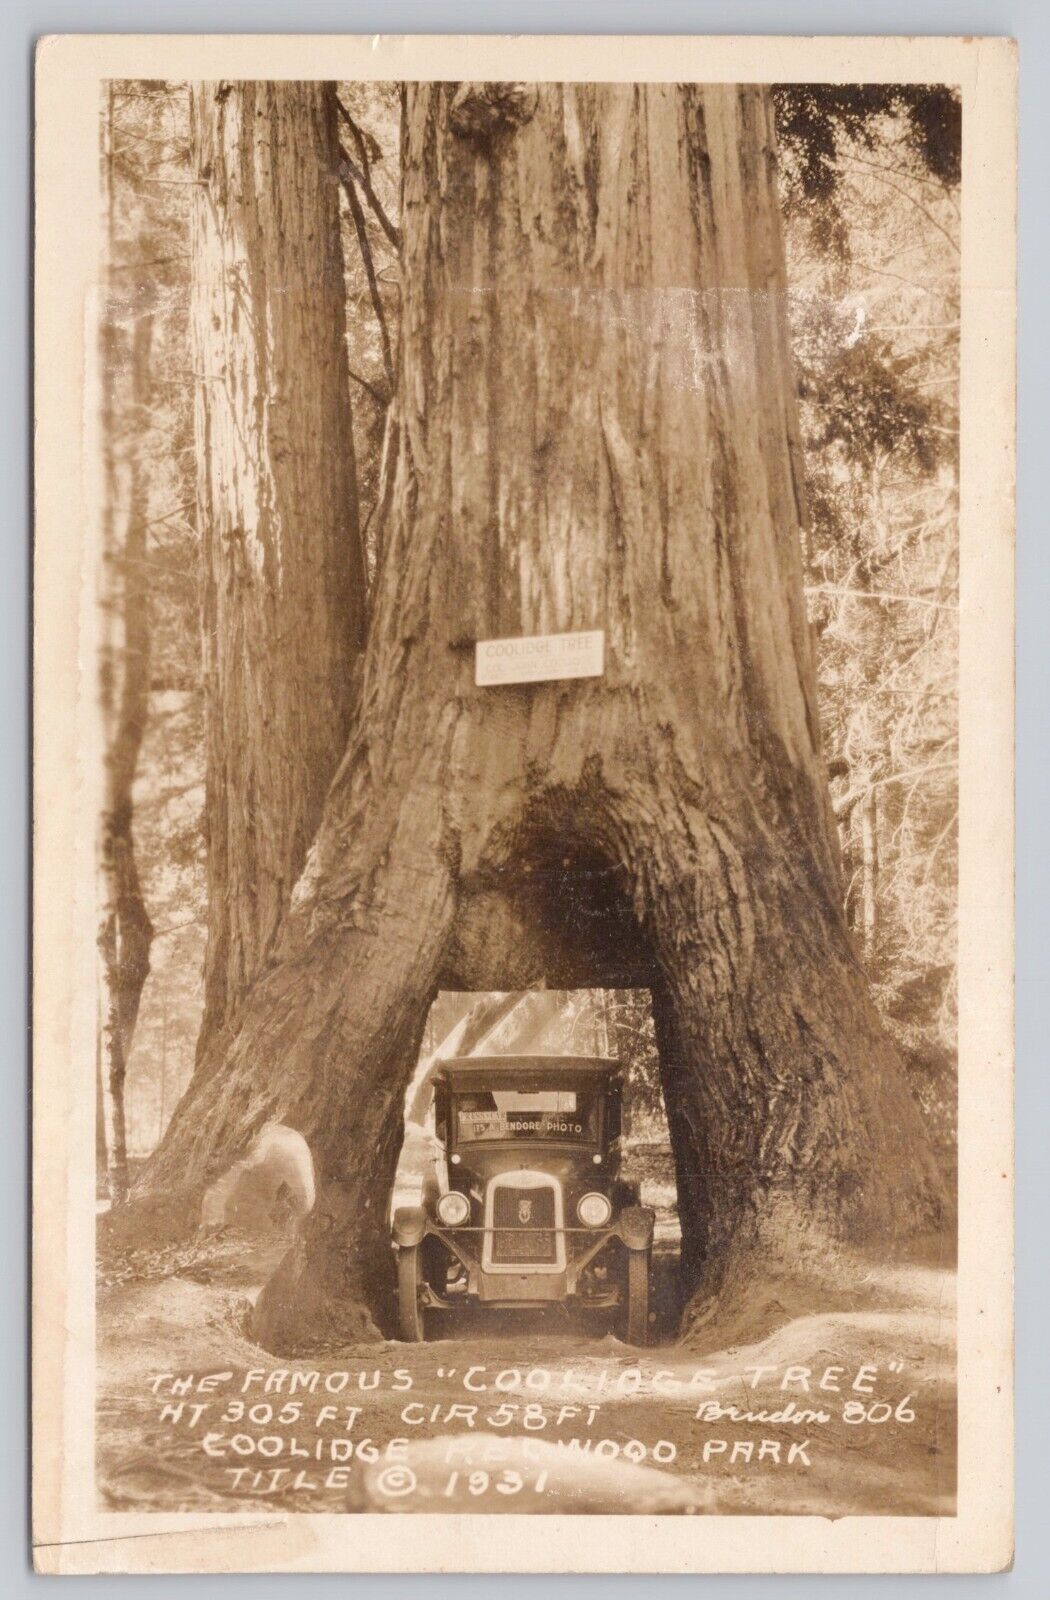 Willits California Old Car in Coolidge Redwood Tree VTG RPPC Real Photo Postcard